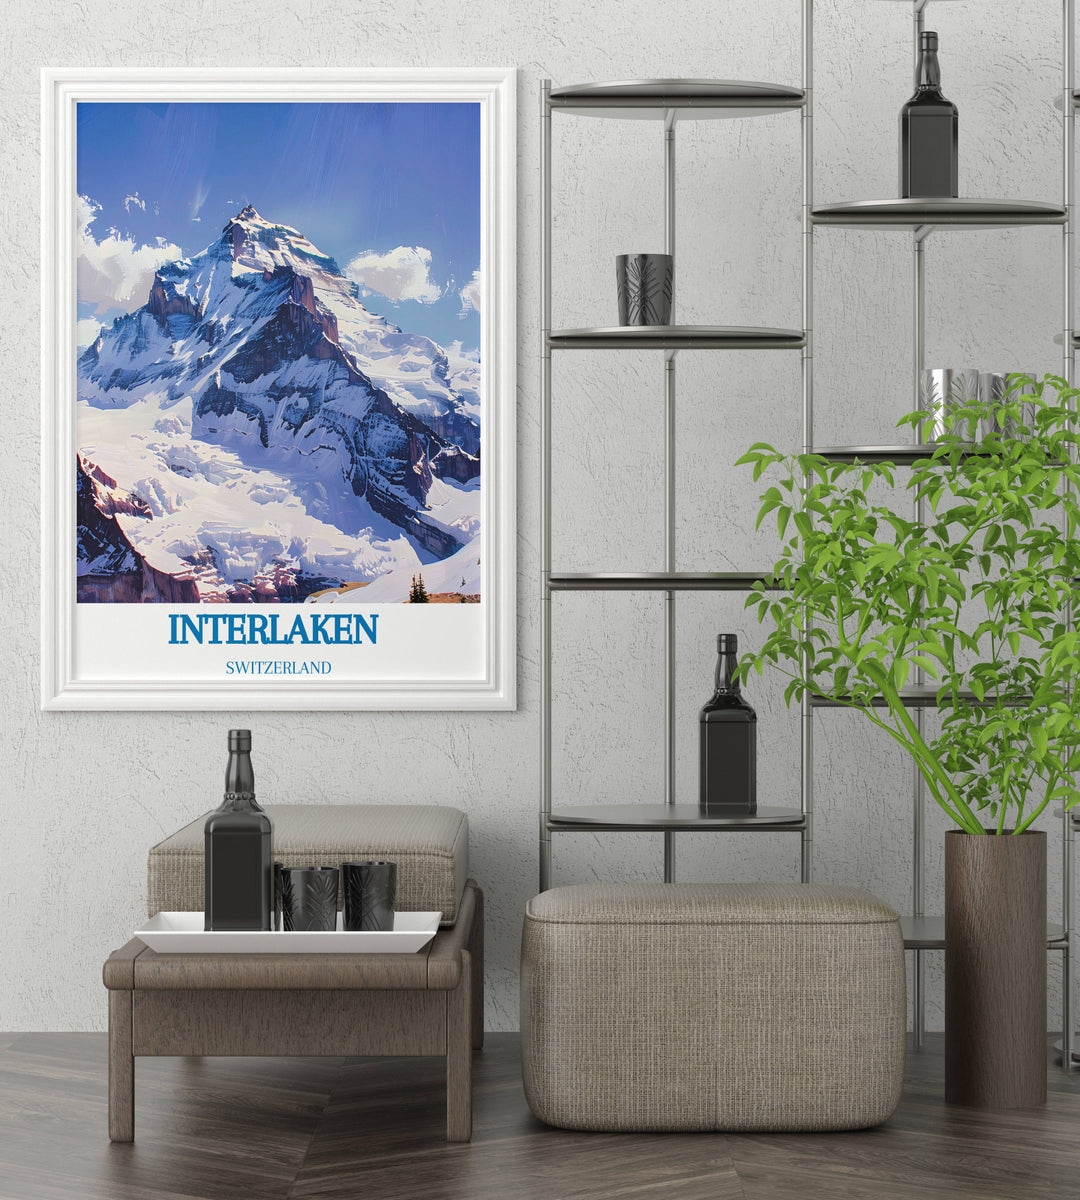 Jungfrau travel poster highlighting the regions famous Lauterbrunnen Valley, perfect for admirers of Swiss natural wonders